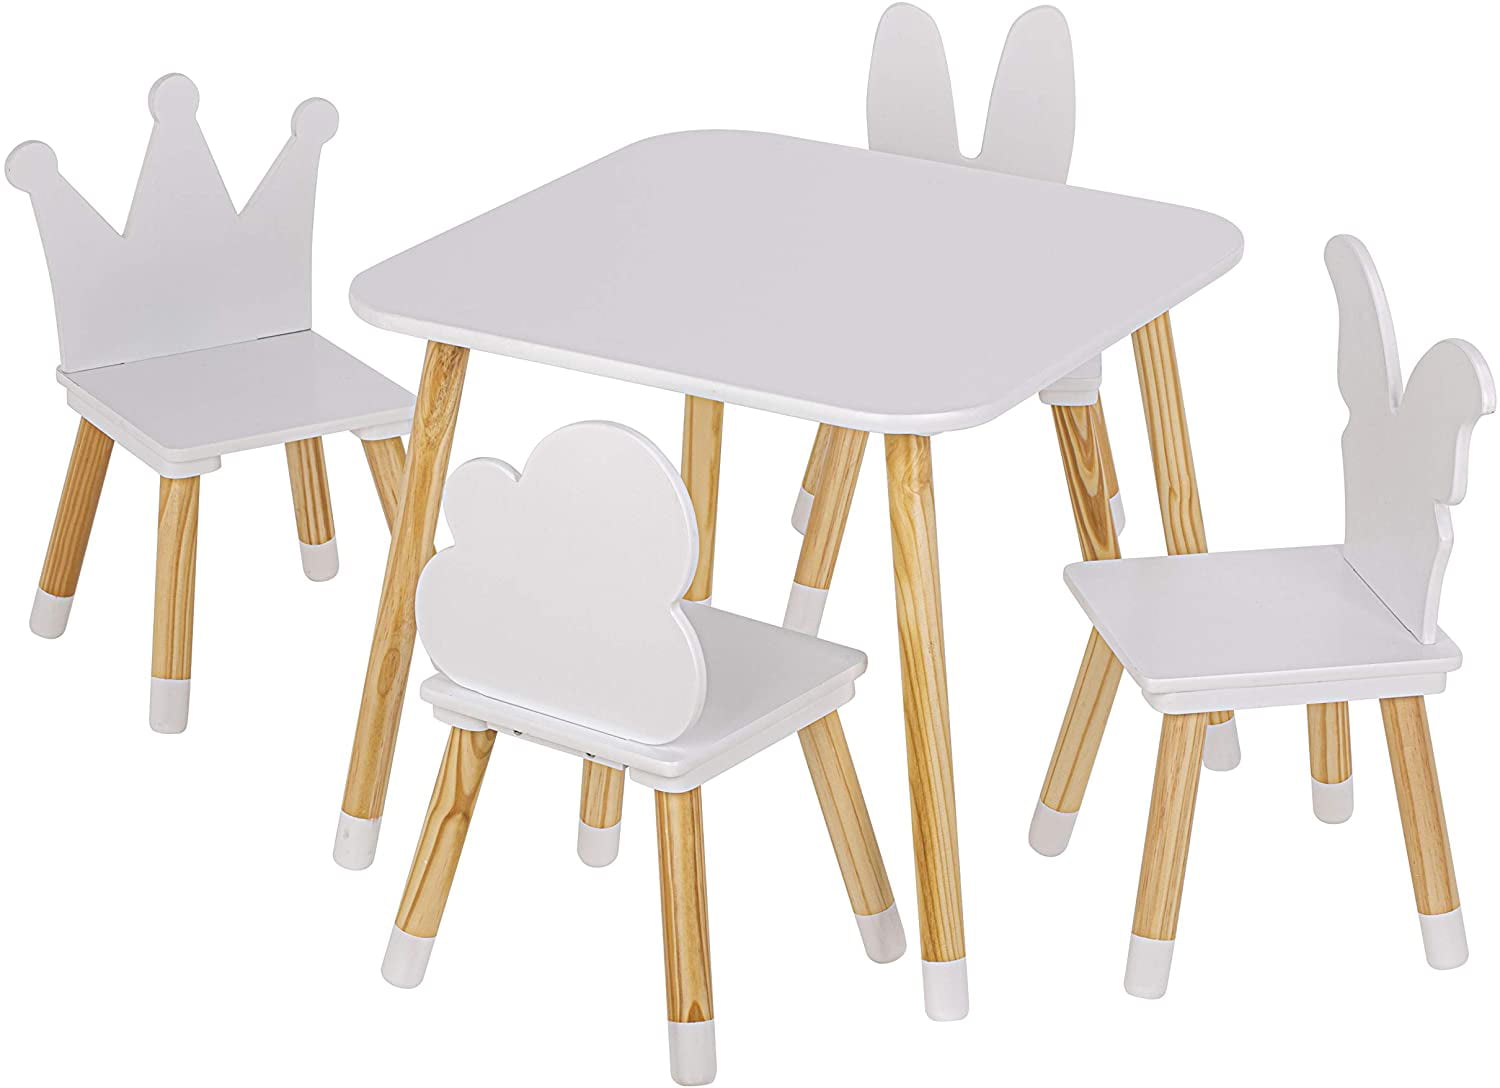 little chairs for kids